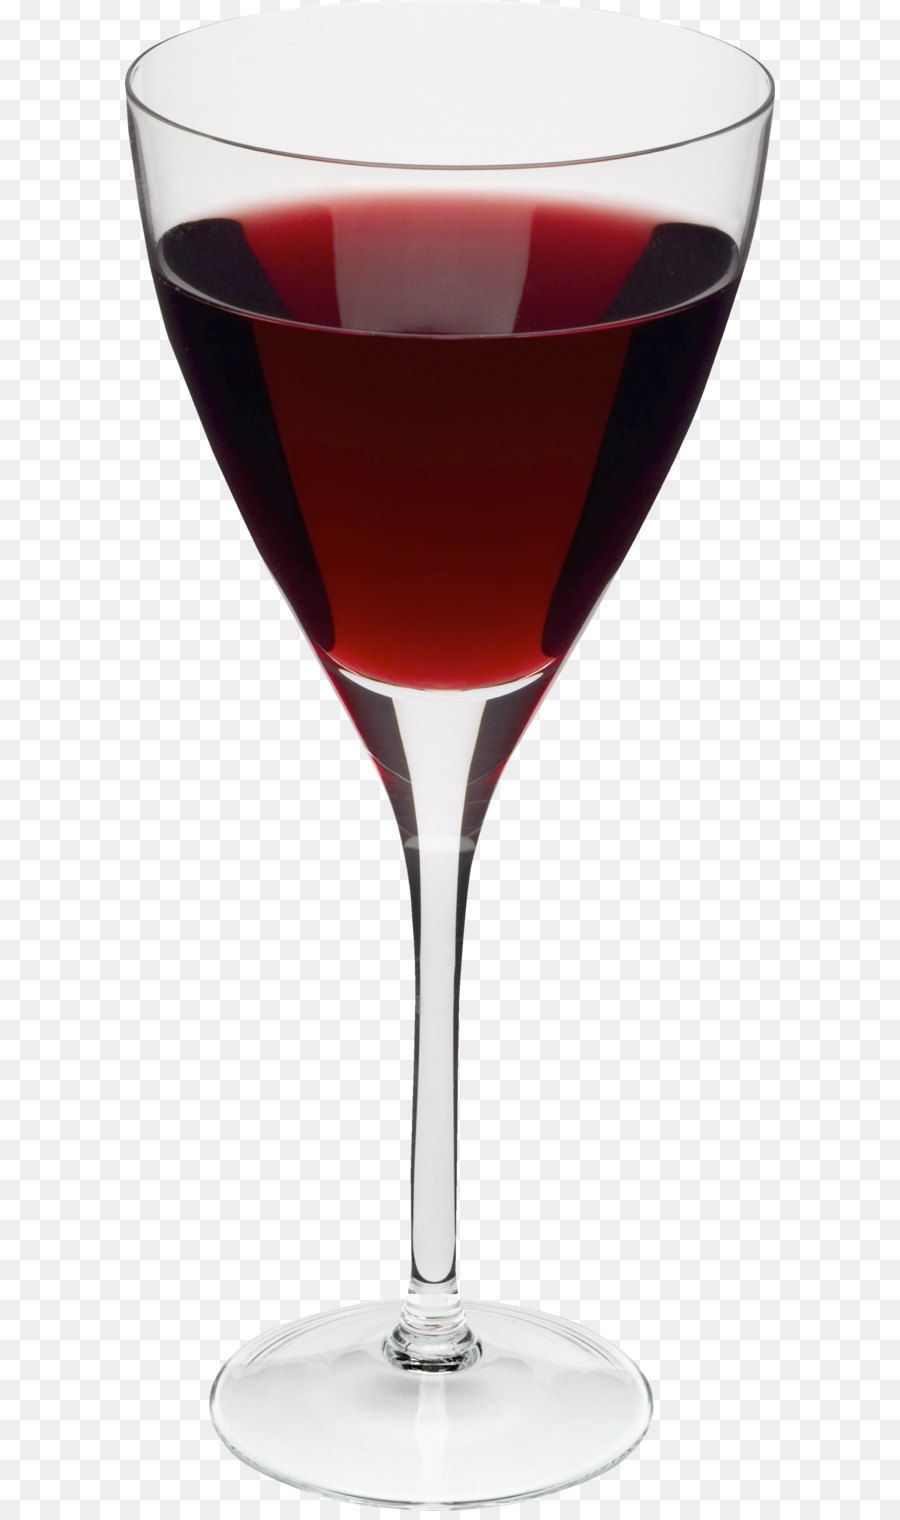 Red Wine Wine glass Clip art - Wine glass PNG image png download - 1506*3500 - Free Transparent Red Wine png Download.